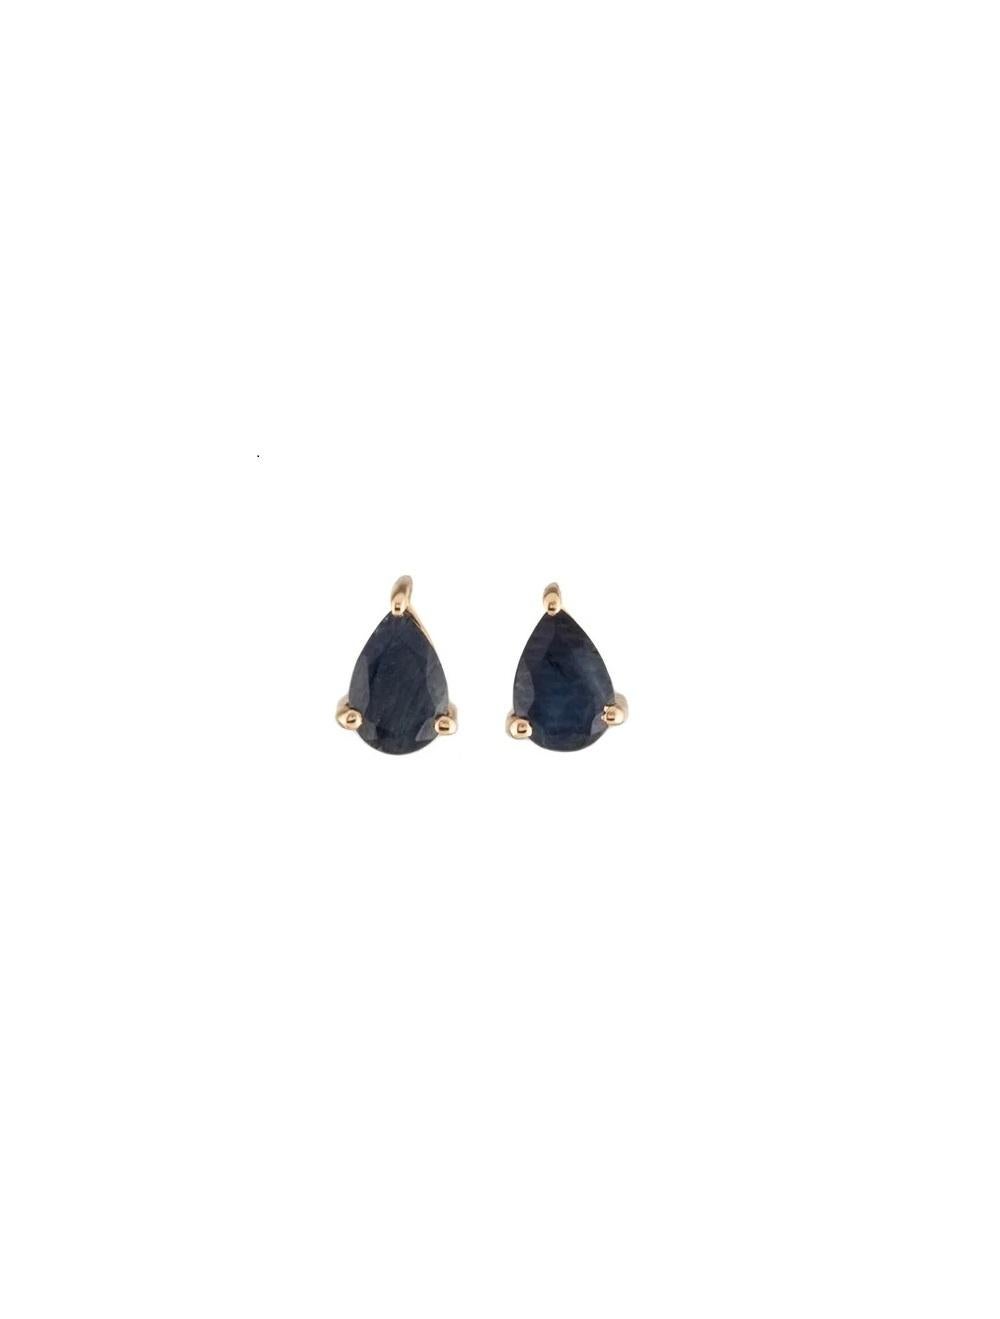 Elevate your elegance with these stunning 14K yellow gold stud earrings, showcasing exquisite 0.86 carat pear modified brilliant blue sapphires. Crafted to perfection, these earrings are a testament to timeless beauty and